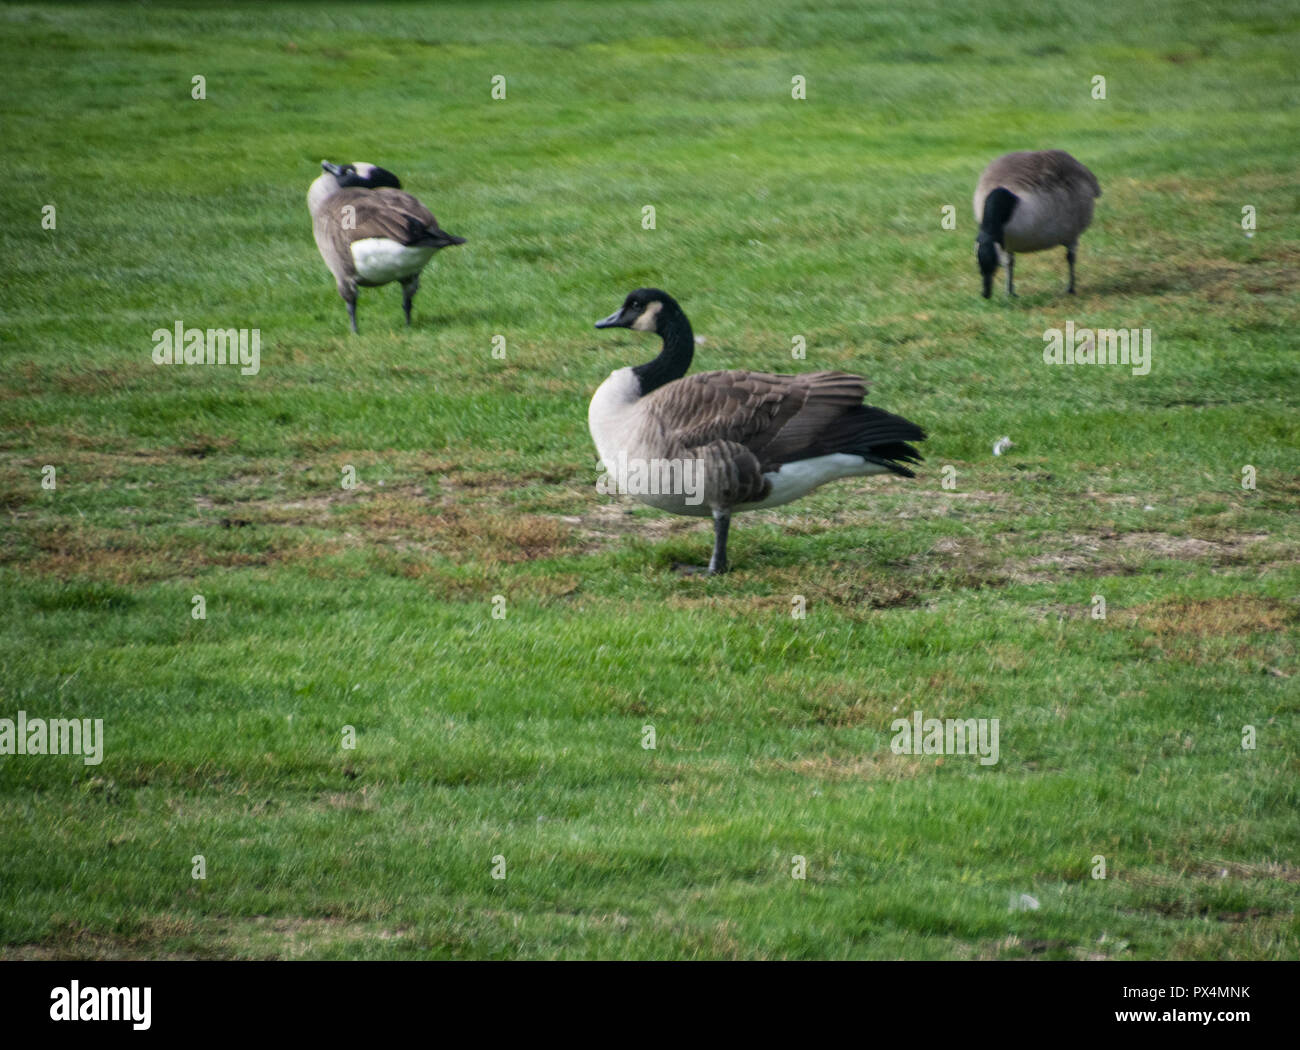 Busy eating or cleaning self or posing are these three geese. Stock Photo